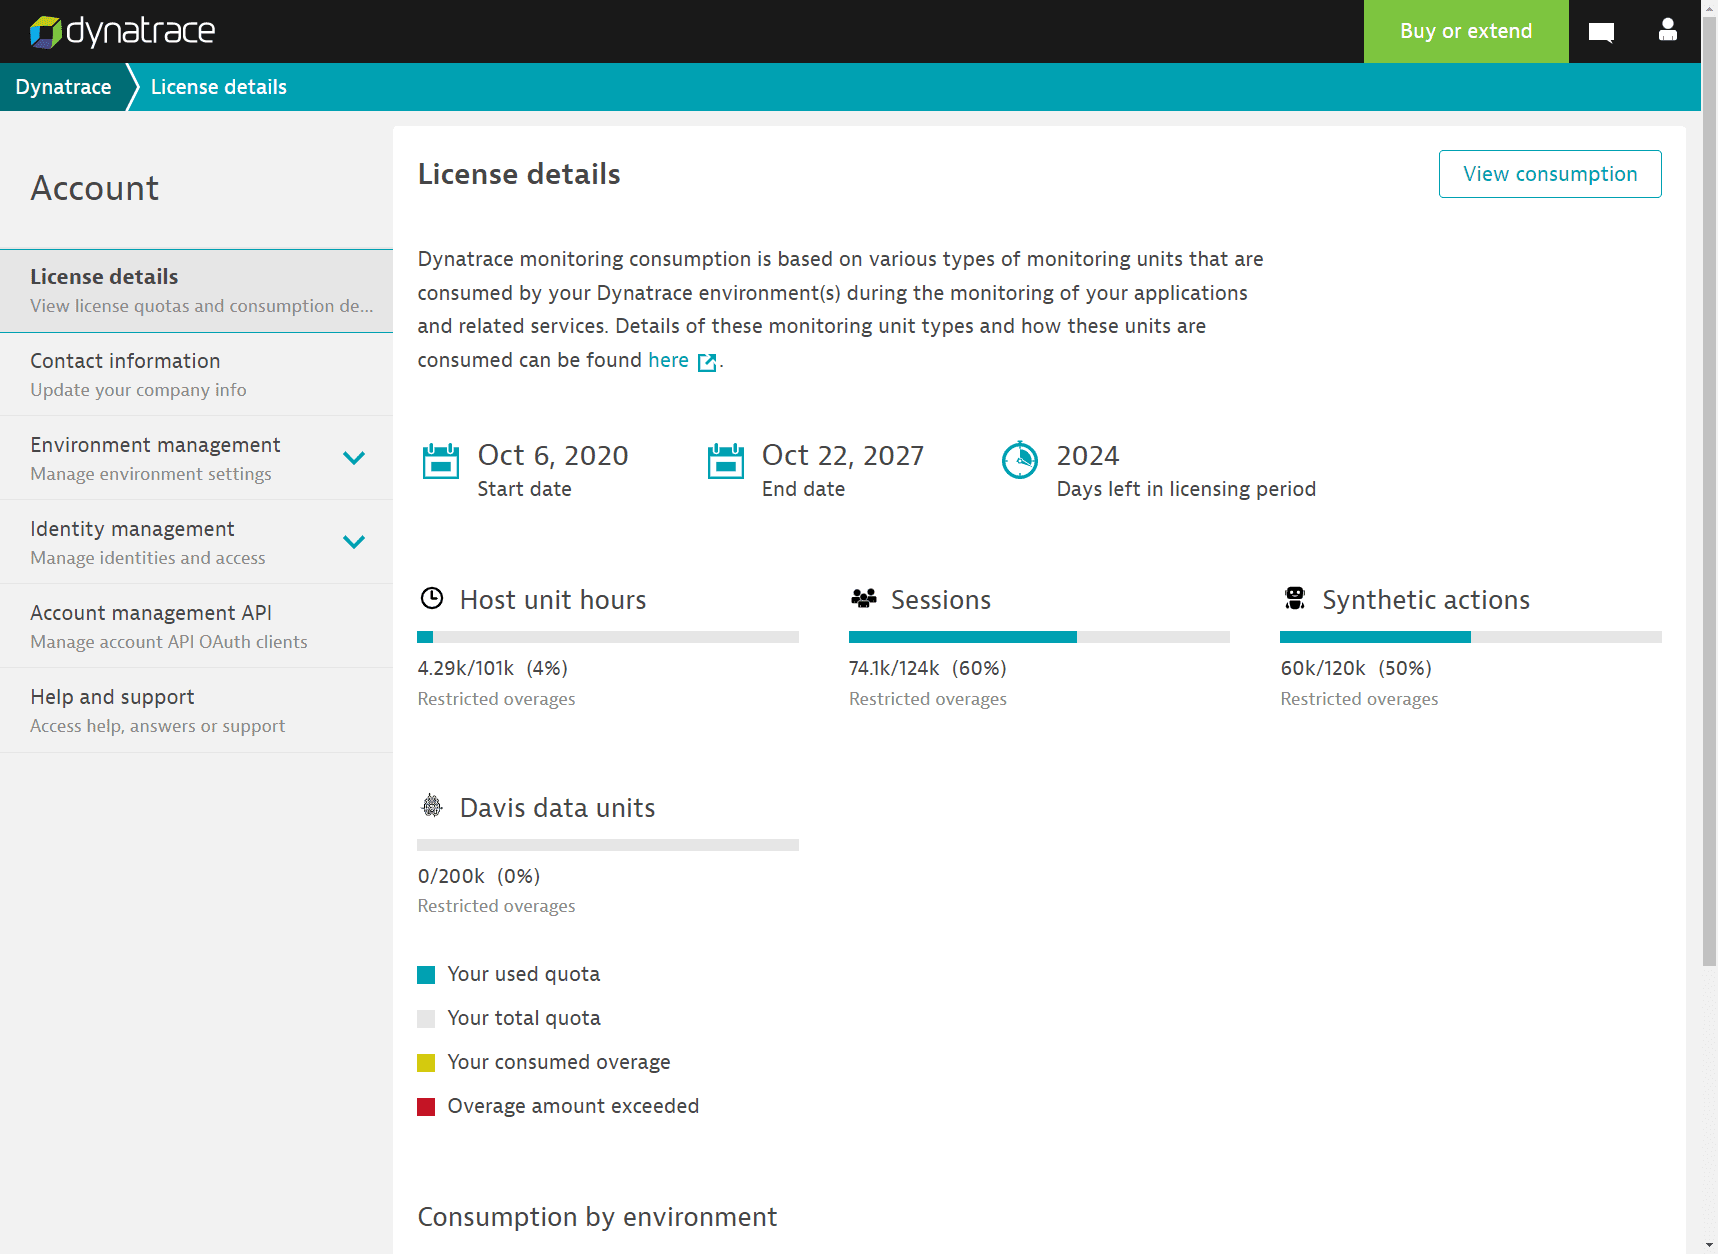 Account setting screen with host units allocation